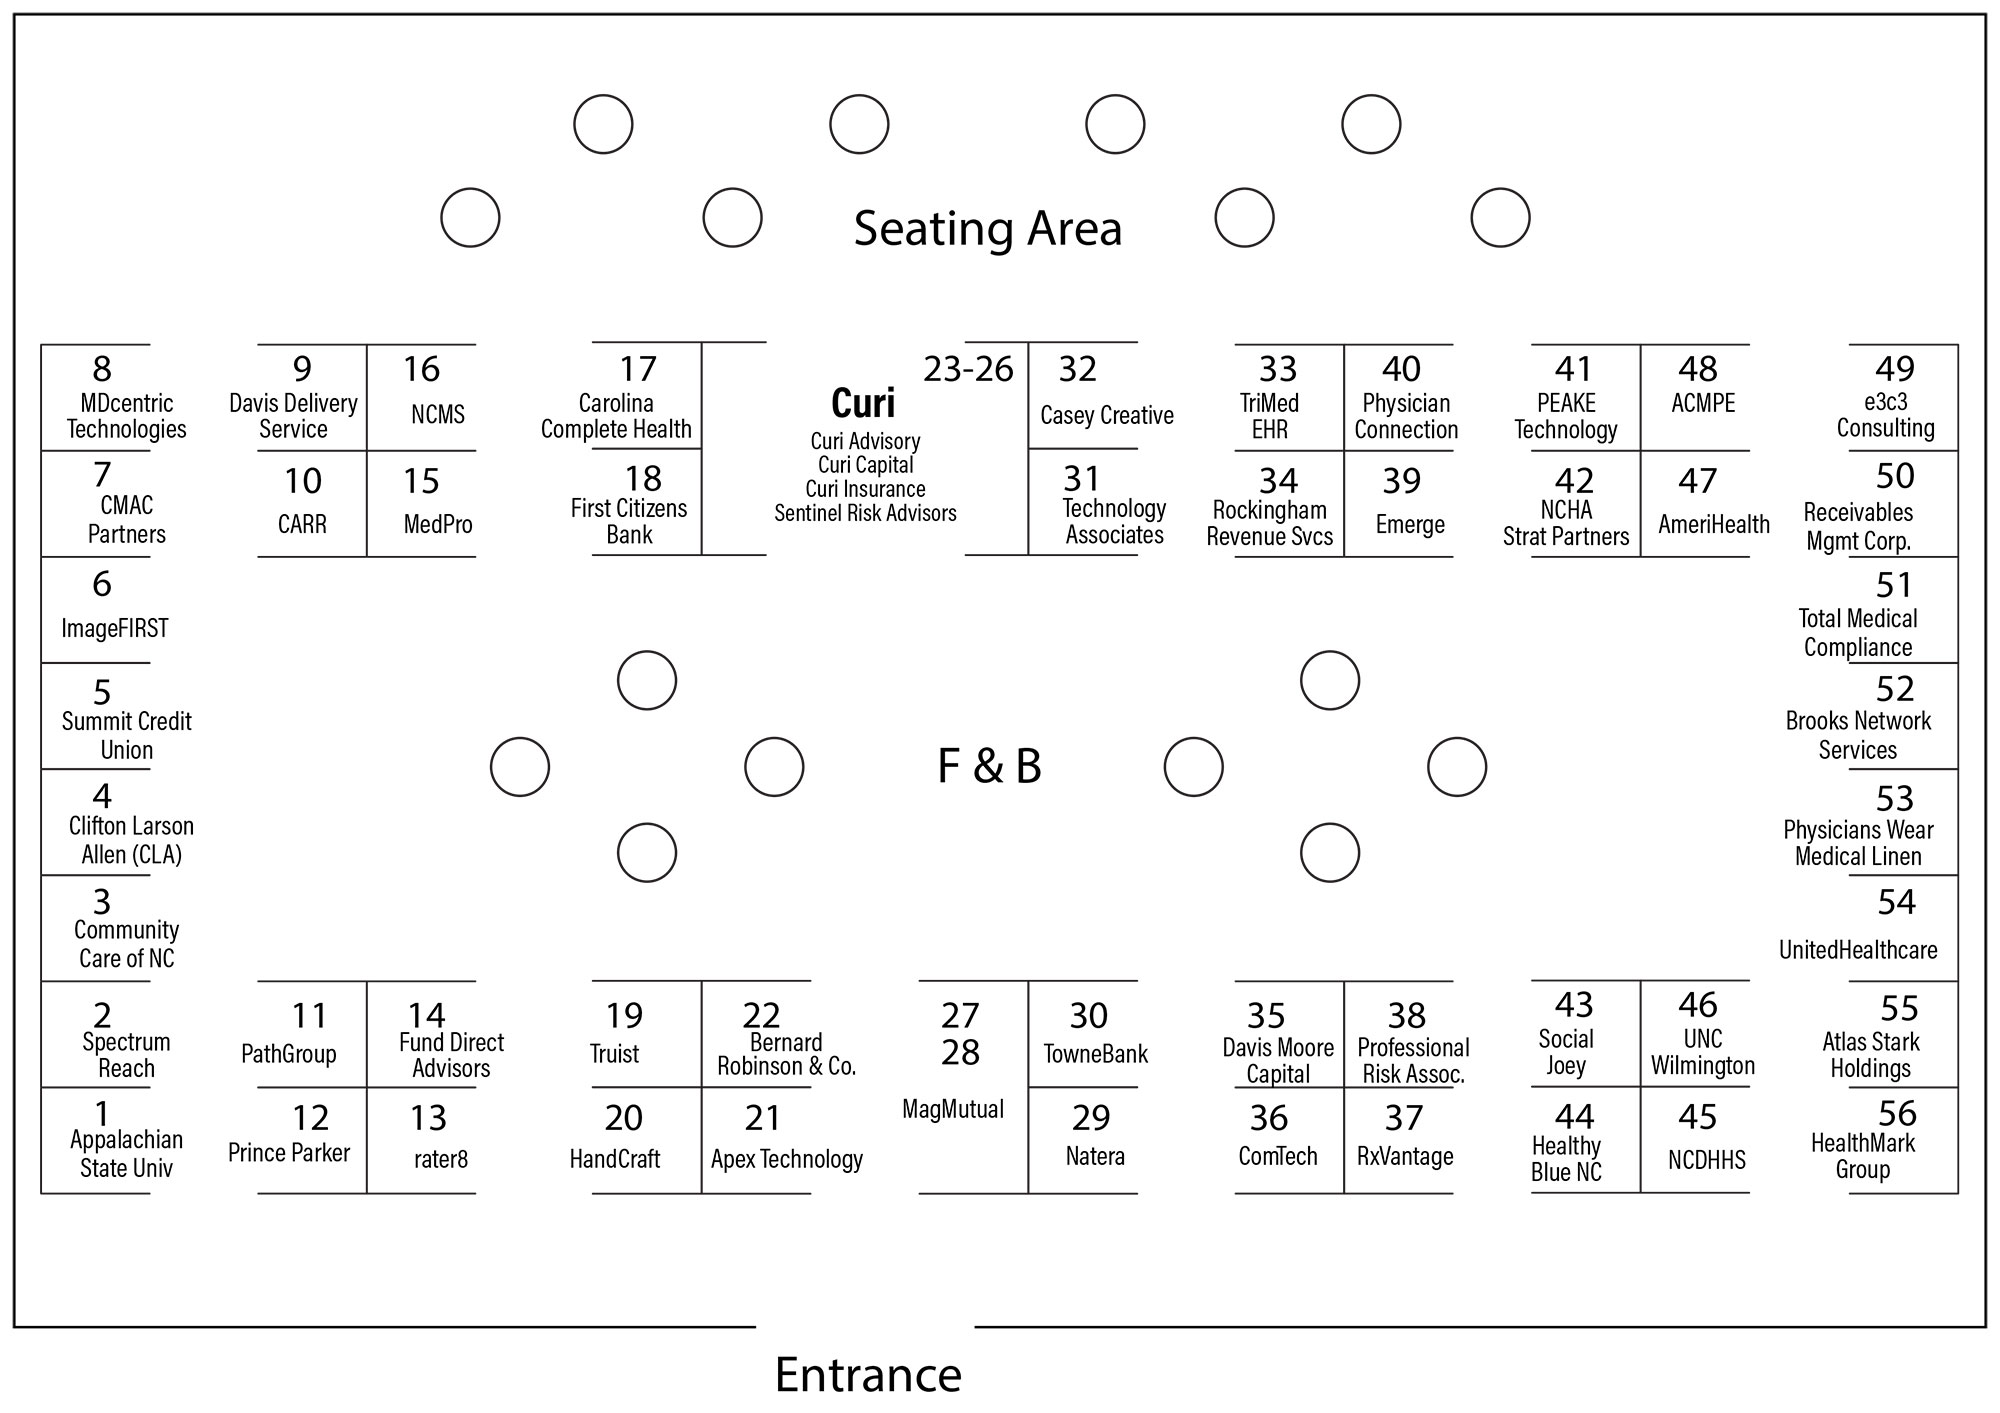 2022 Annual Conference Exhibit Hall Layout with Exhibitors